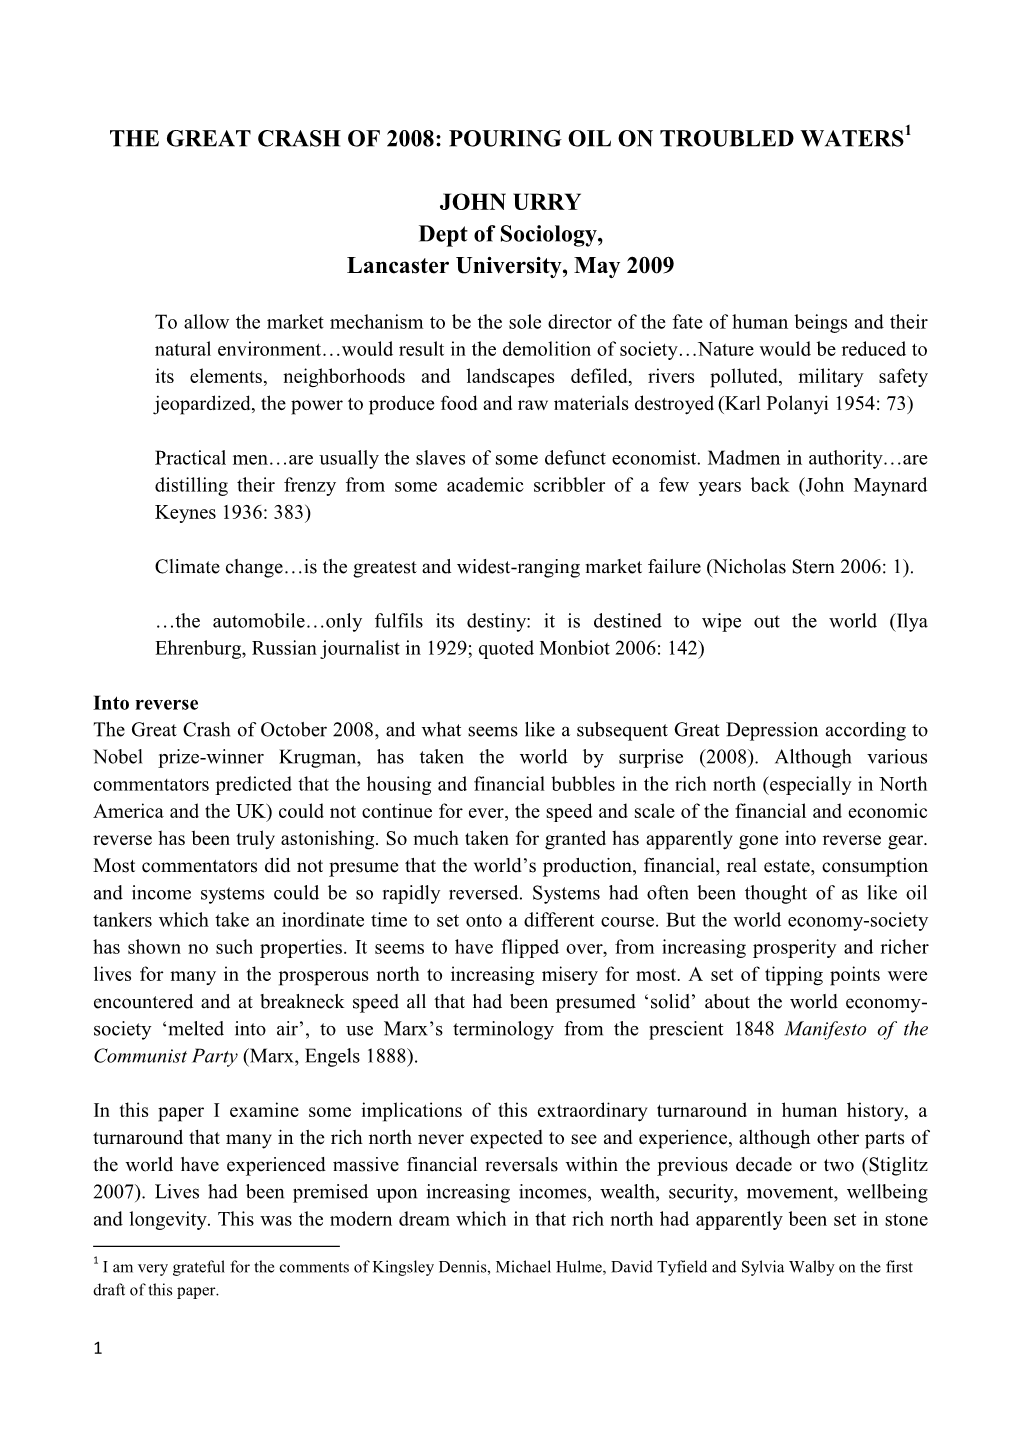 THE GREAT CRASH of 2008: POURING OIL on TROUBLED WATERS JOHN URRY Dept of Sociology, Lancaster University, May 2009